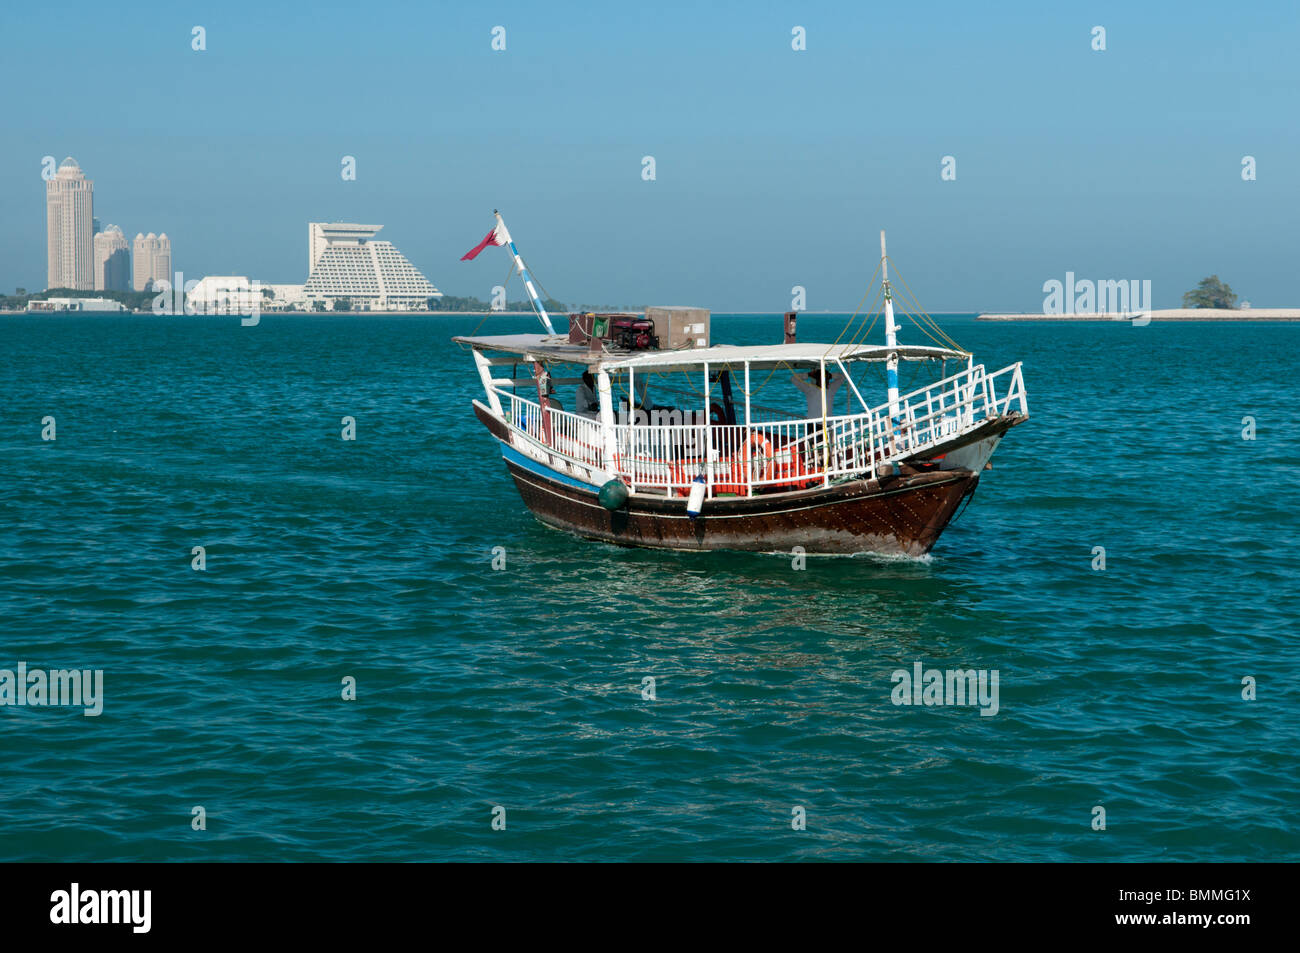 Dhow (boat) in Doha, Qatar with Qtel Tower and Sheraton Hotel in background Stock Photo